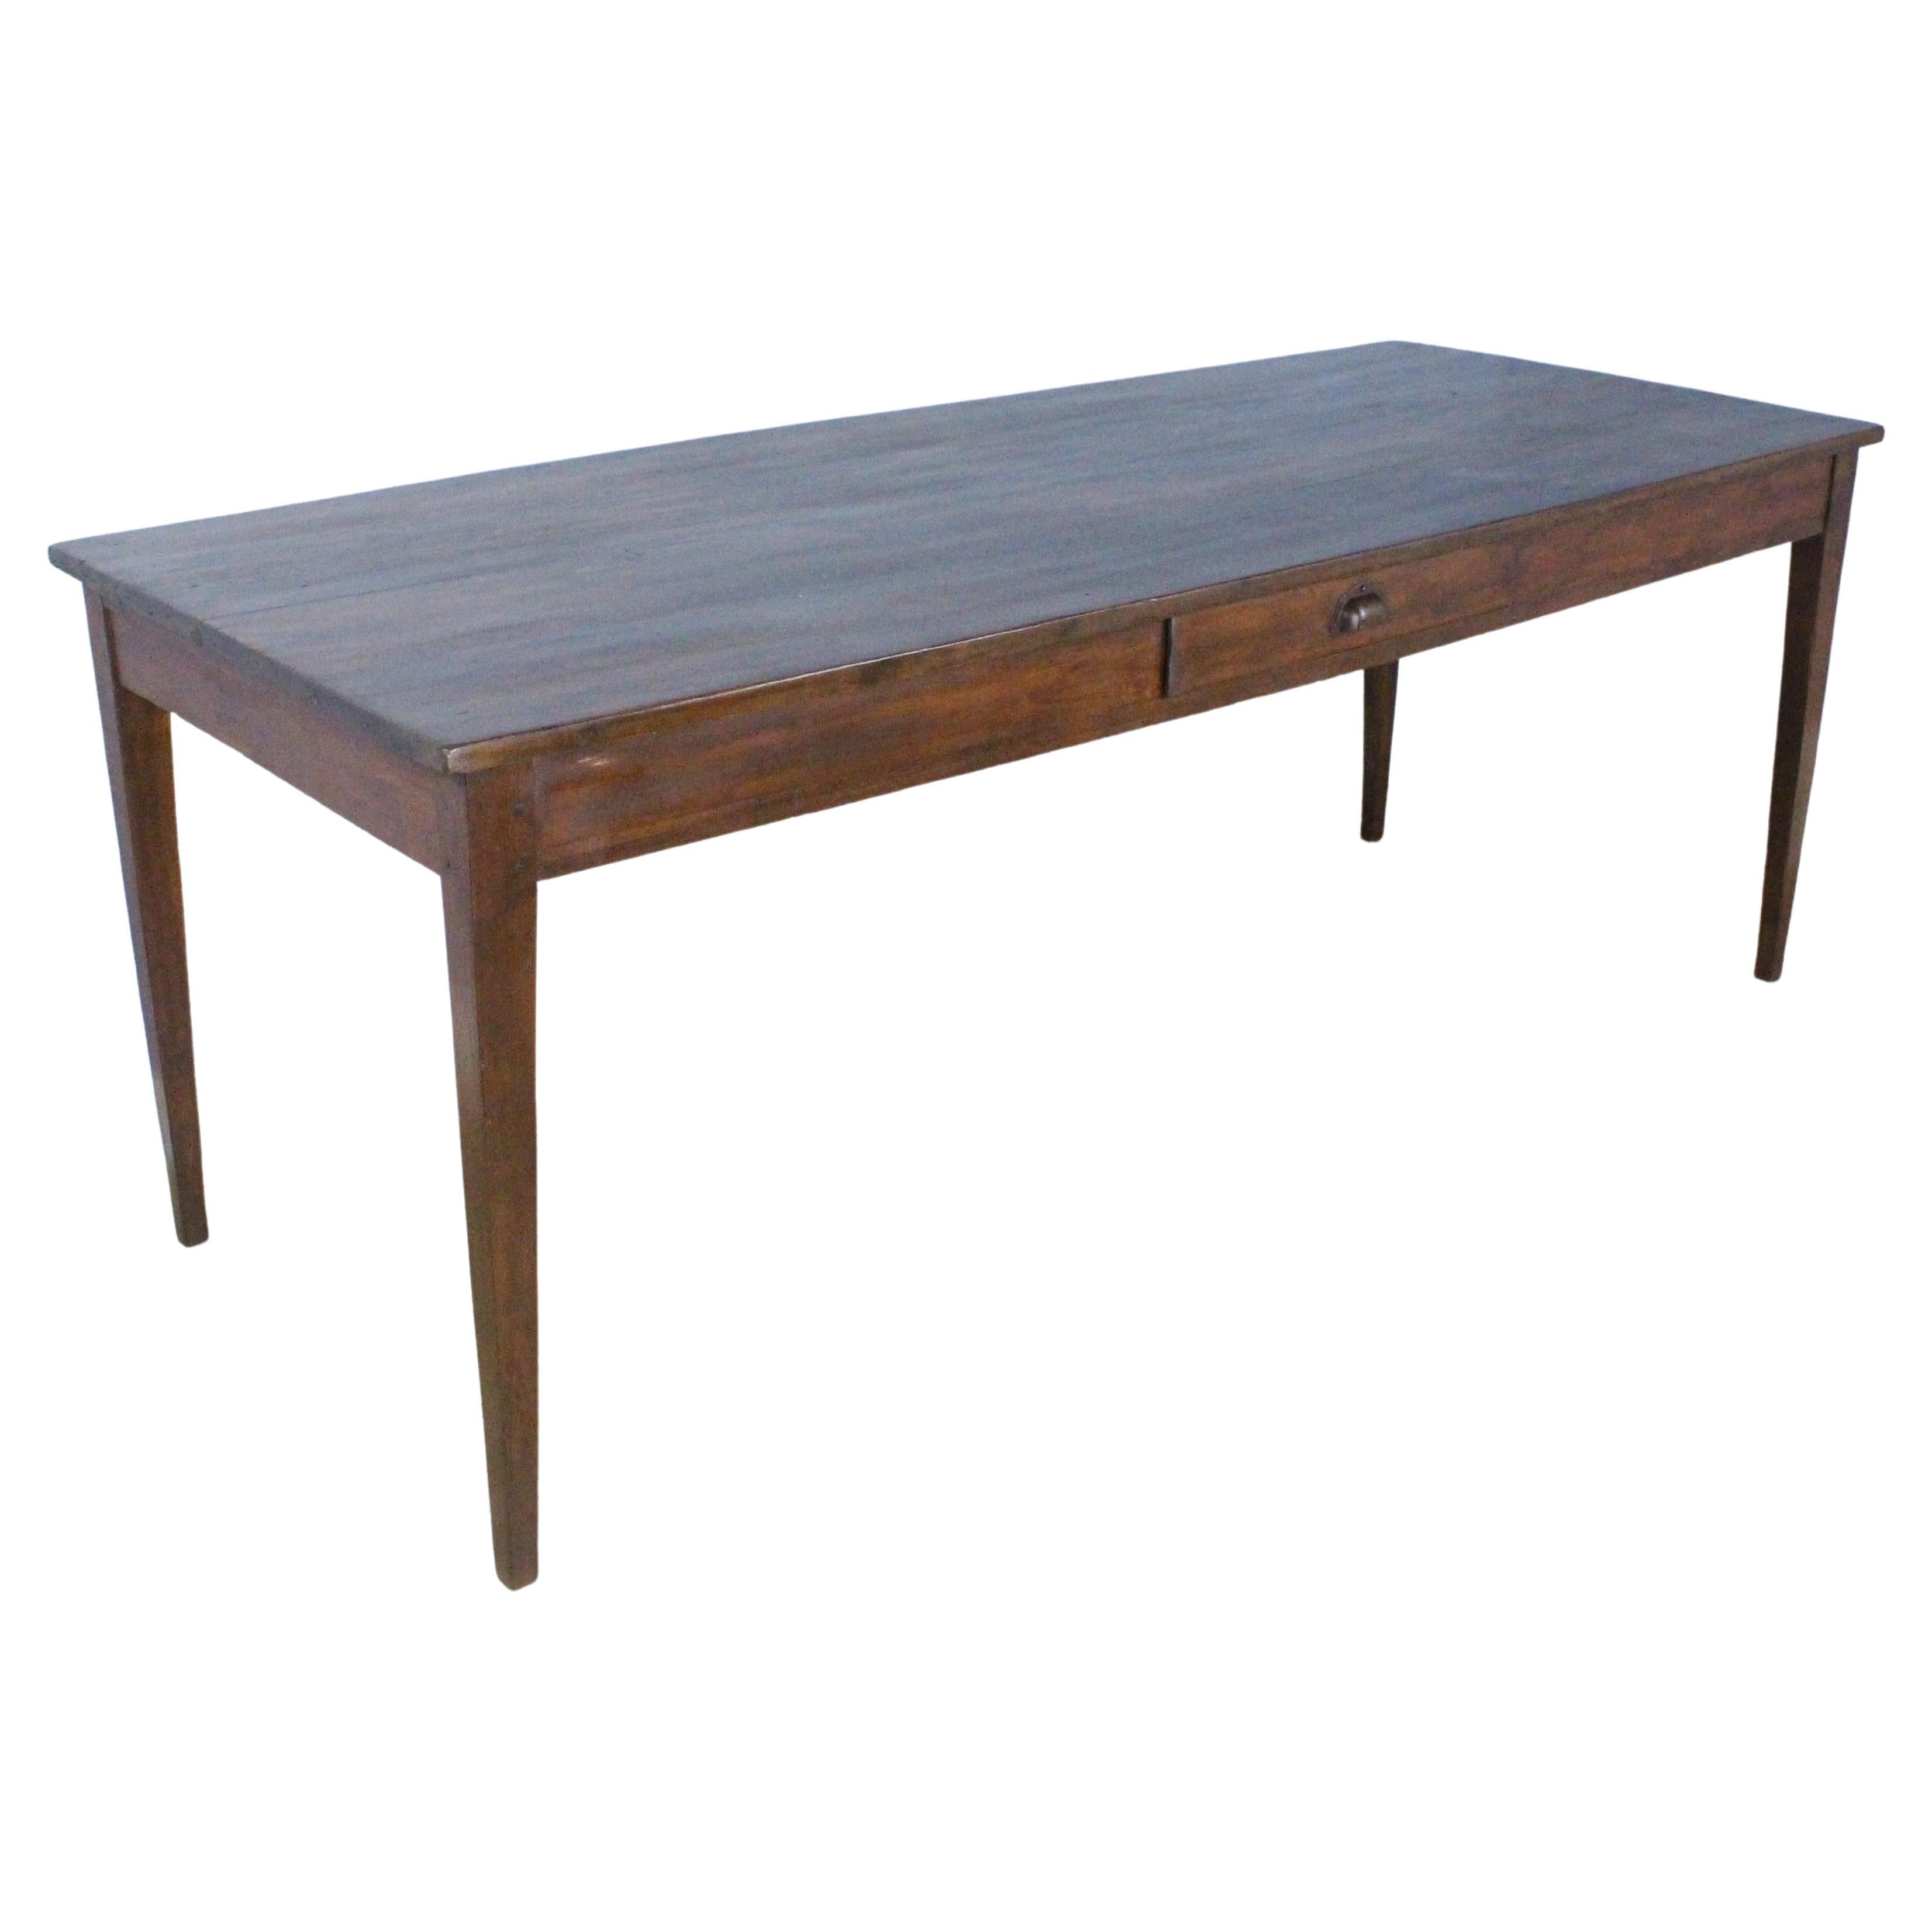 Antique Fruitwood Farm Table, One Drawer